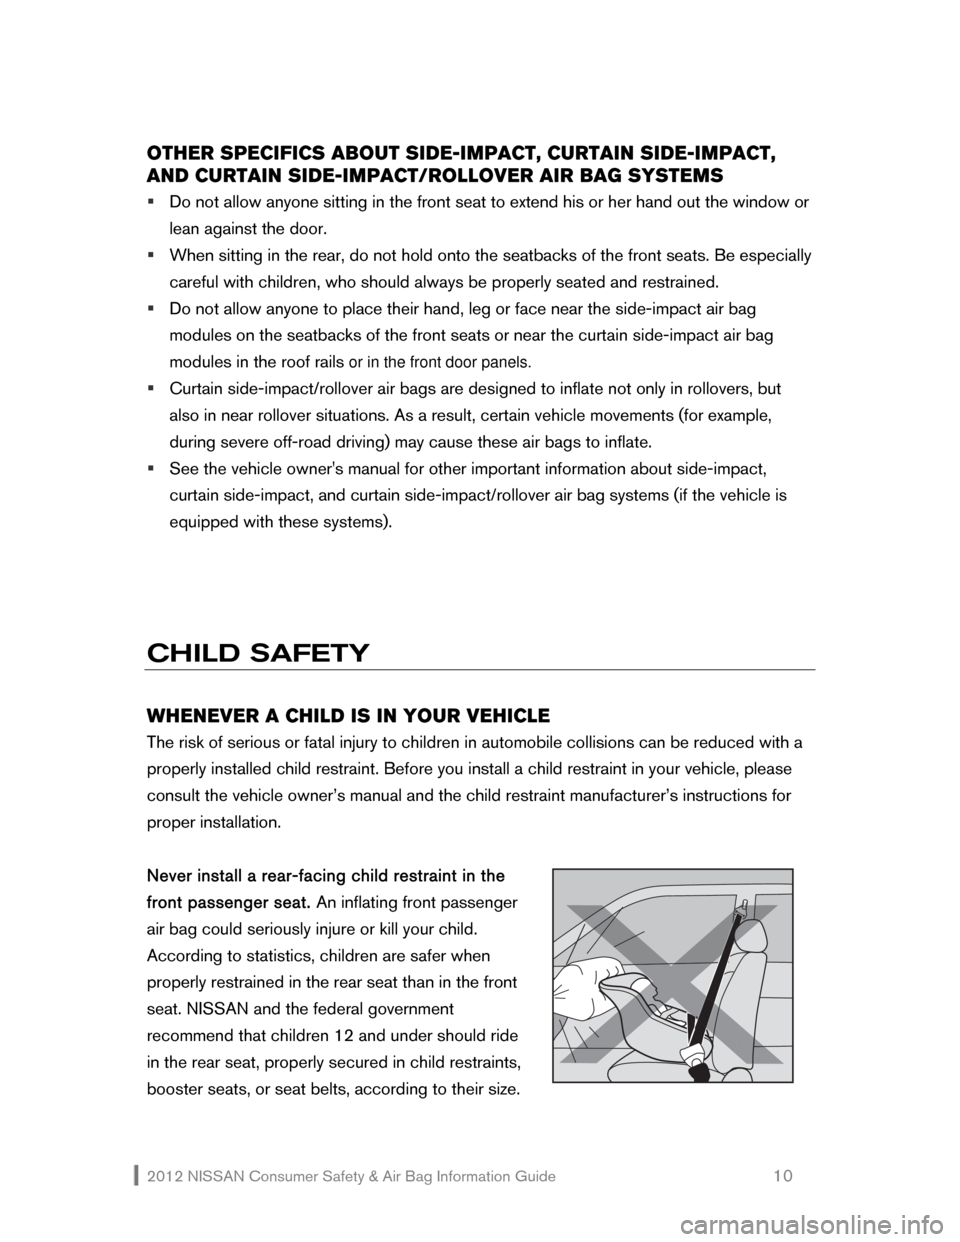 NISSAN 370Z ROADSTER 2012 Z34 Consumer Safety Air Bag Information Guide 2012 NISSAN Consumer Safety & Air Bag Information Guide                                                   10 
OTHER SPECIFICS ABOUT SIDE-IMPACT, CURTAIN SIDE-IMPACT, 
AND CURTAIN SIDE-IMPACT/ROLLOVER 